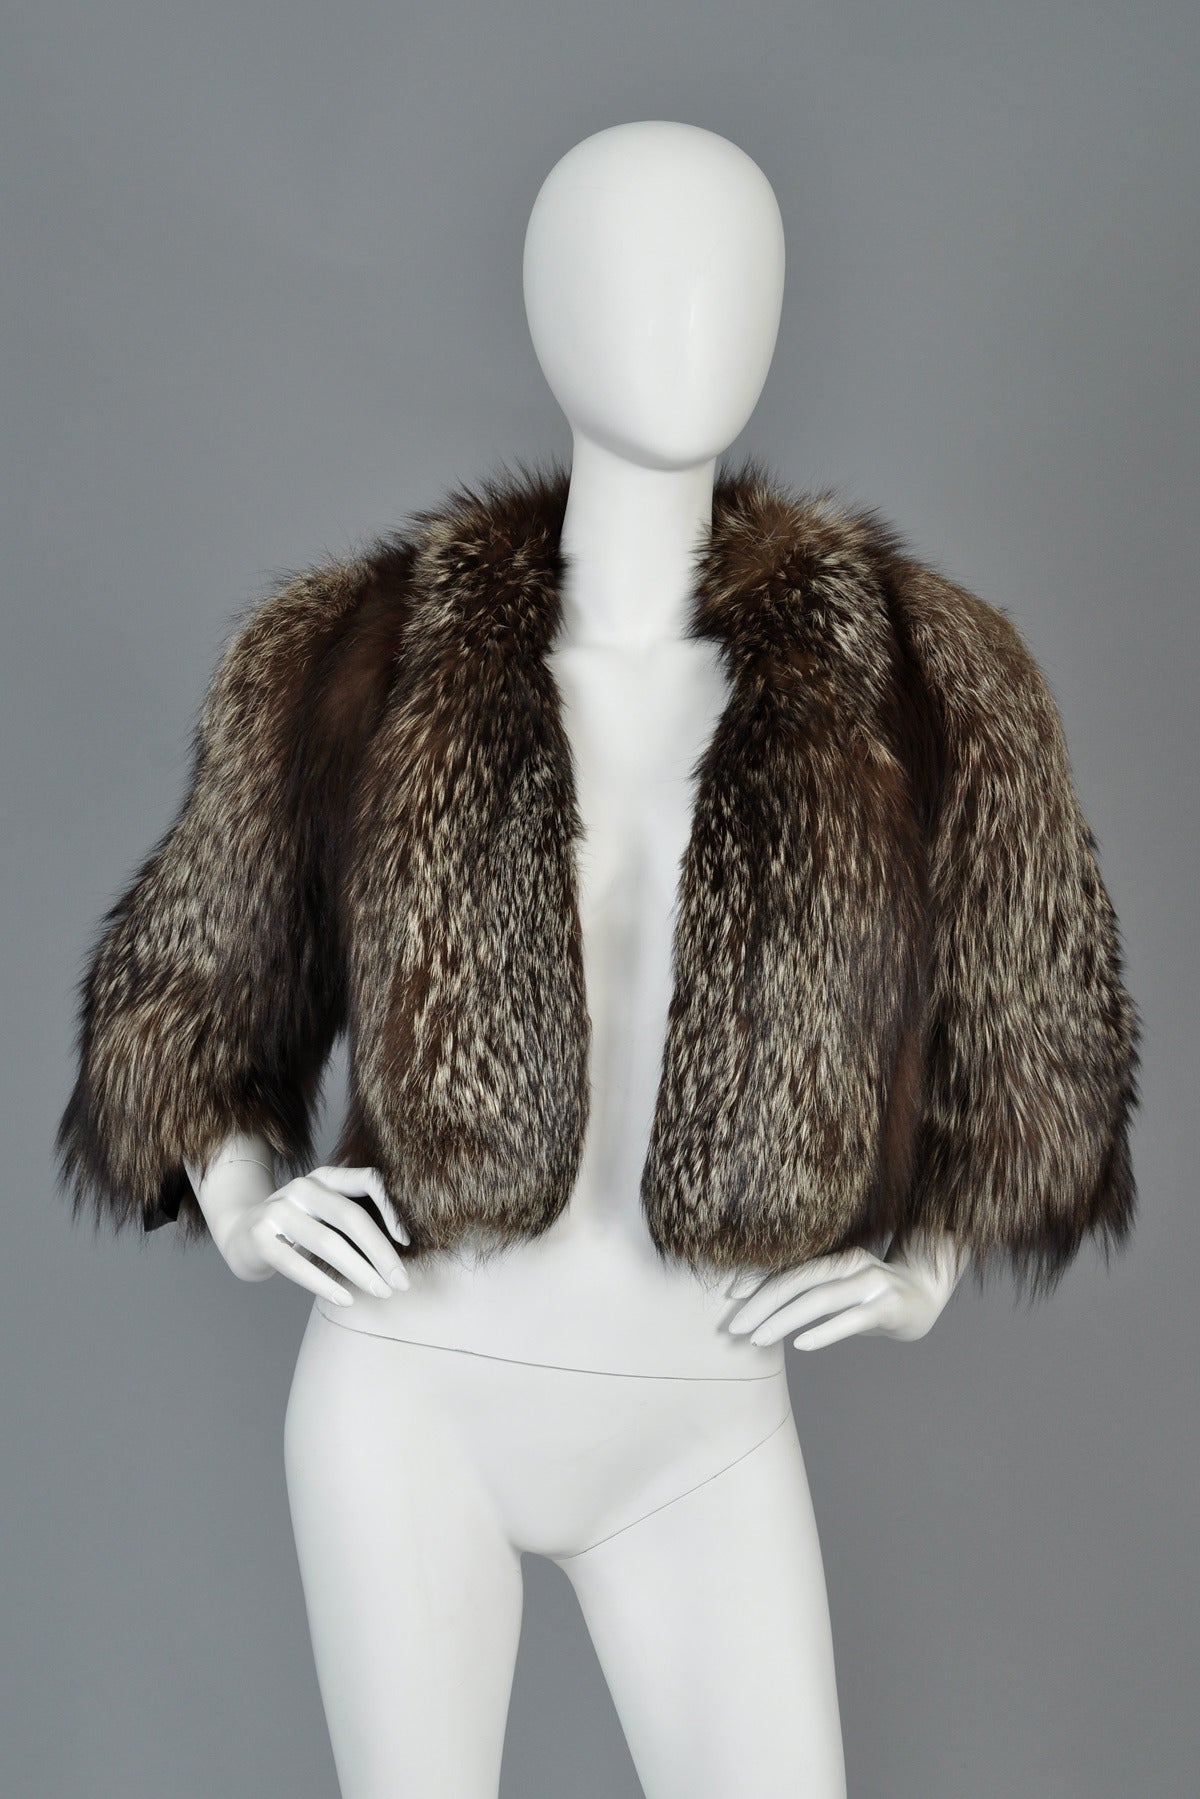 Stunning late 1930s/early 1940s silver fox fur bolero by Edward Molyneux. An extremely rare find. Known for his simple yet elegant couture designs, Molyneux pieces are exceedingly rare and coveted. We are so pleased to offer for sale this late